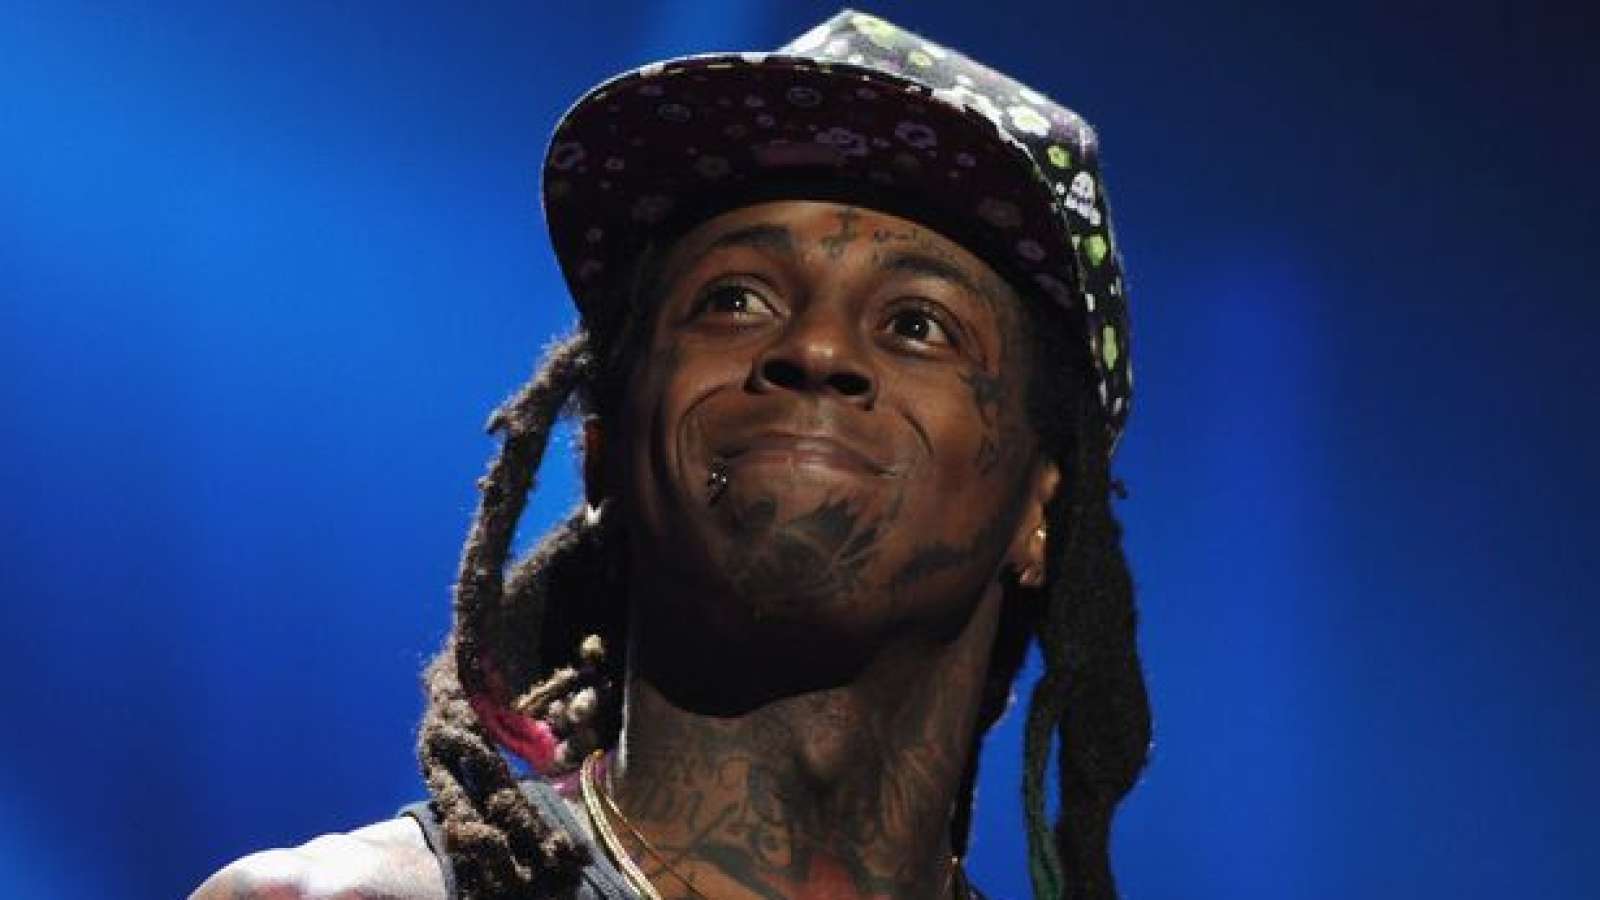 Lil Wayne: Rapper could face battery charges.com